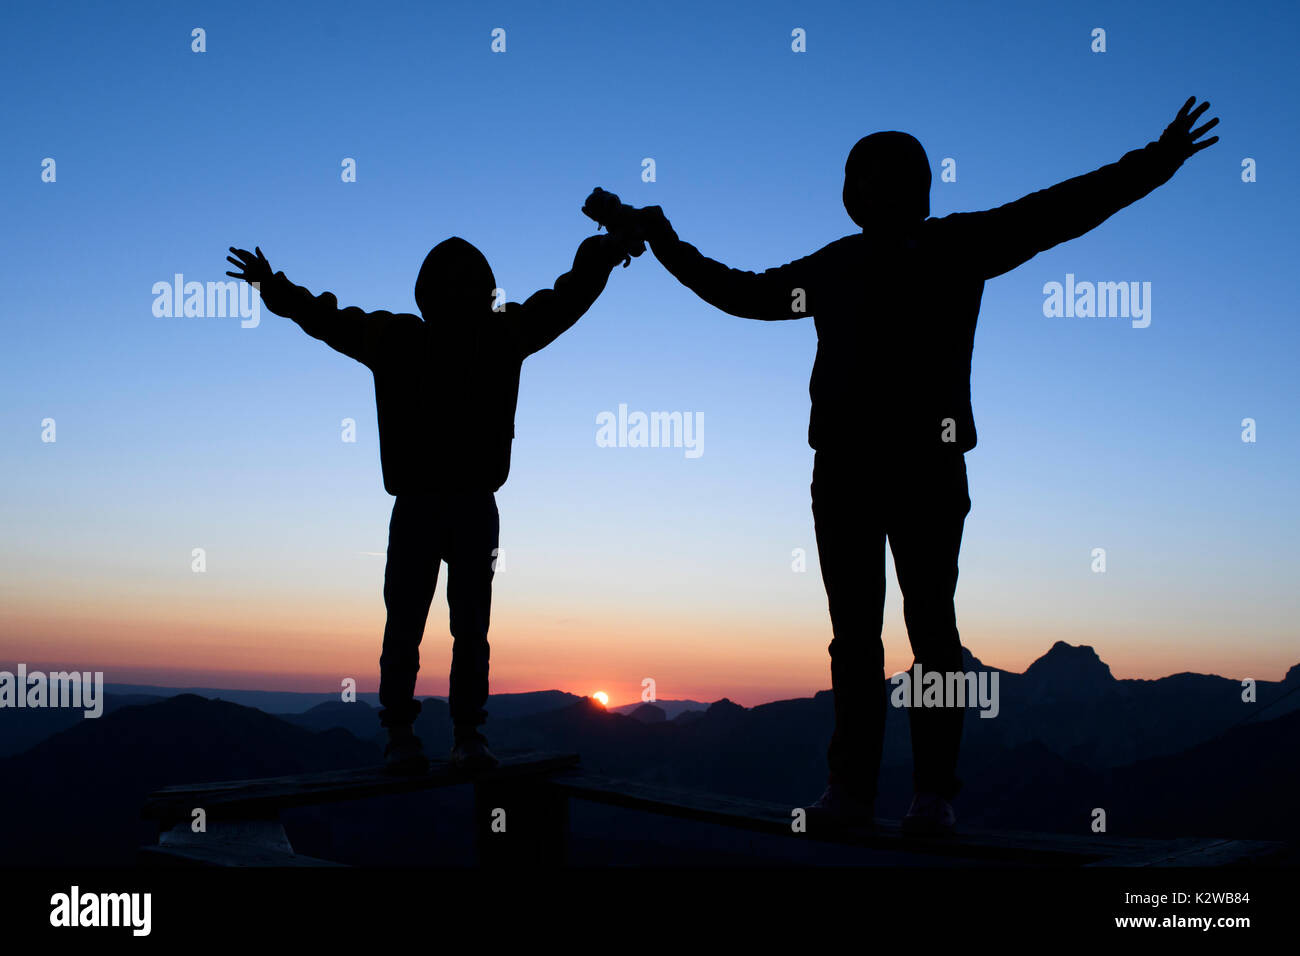 A silhouette of two people infornt of a setting sun Stock Photo